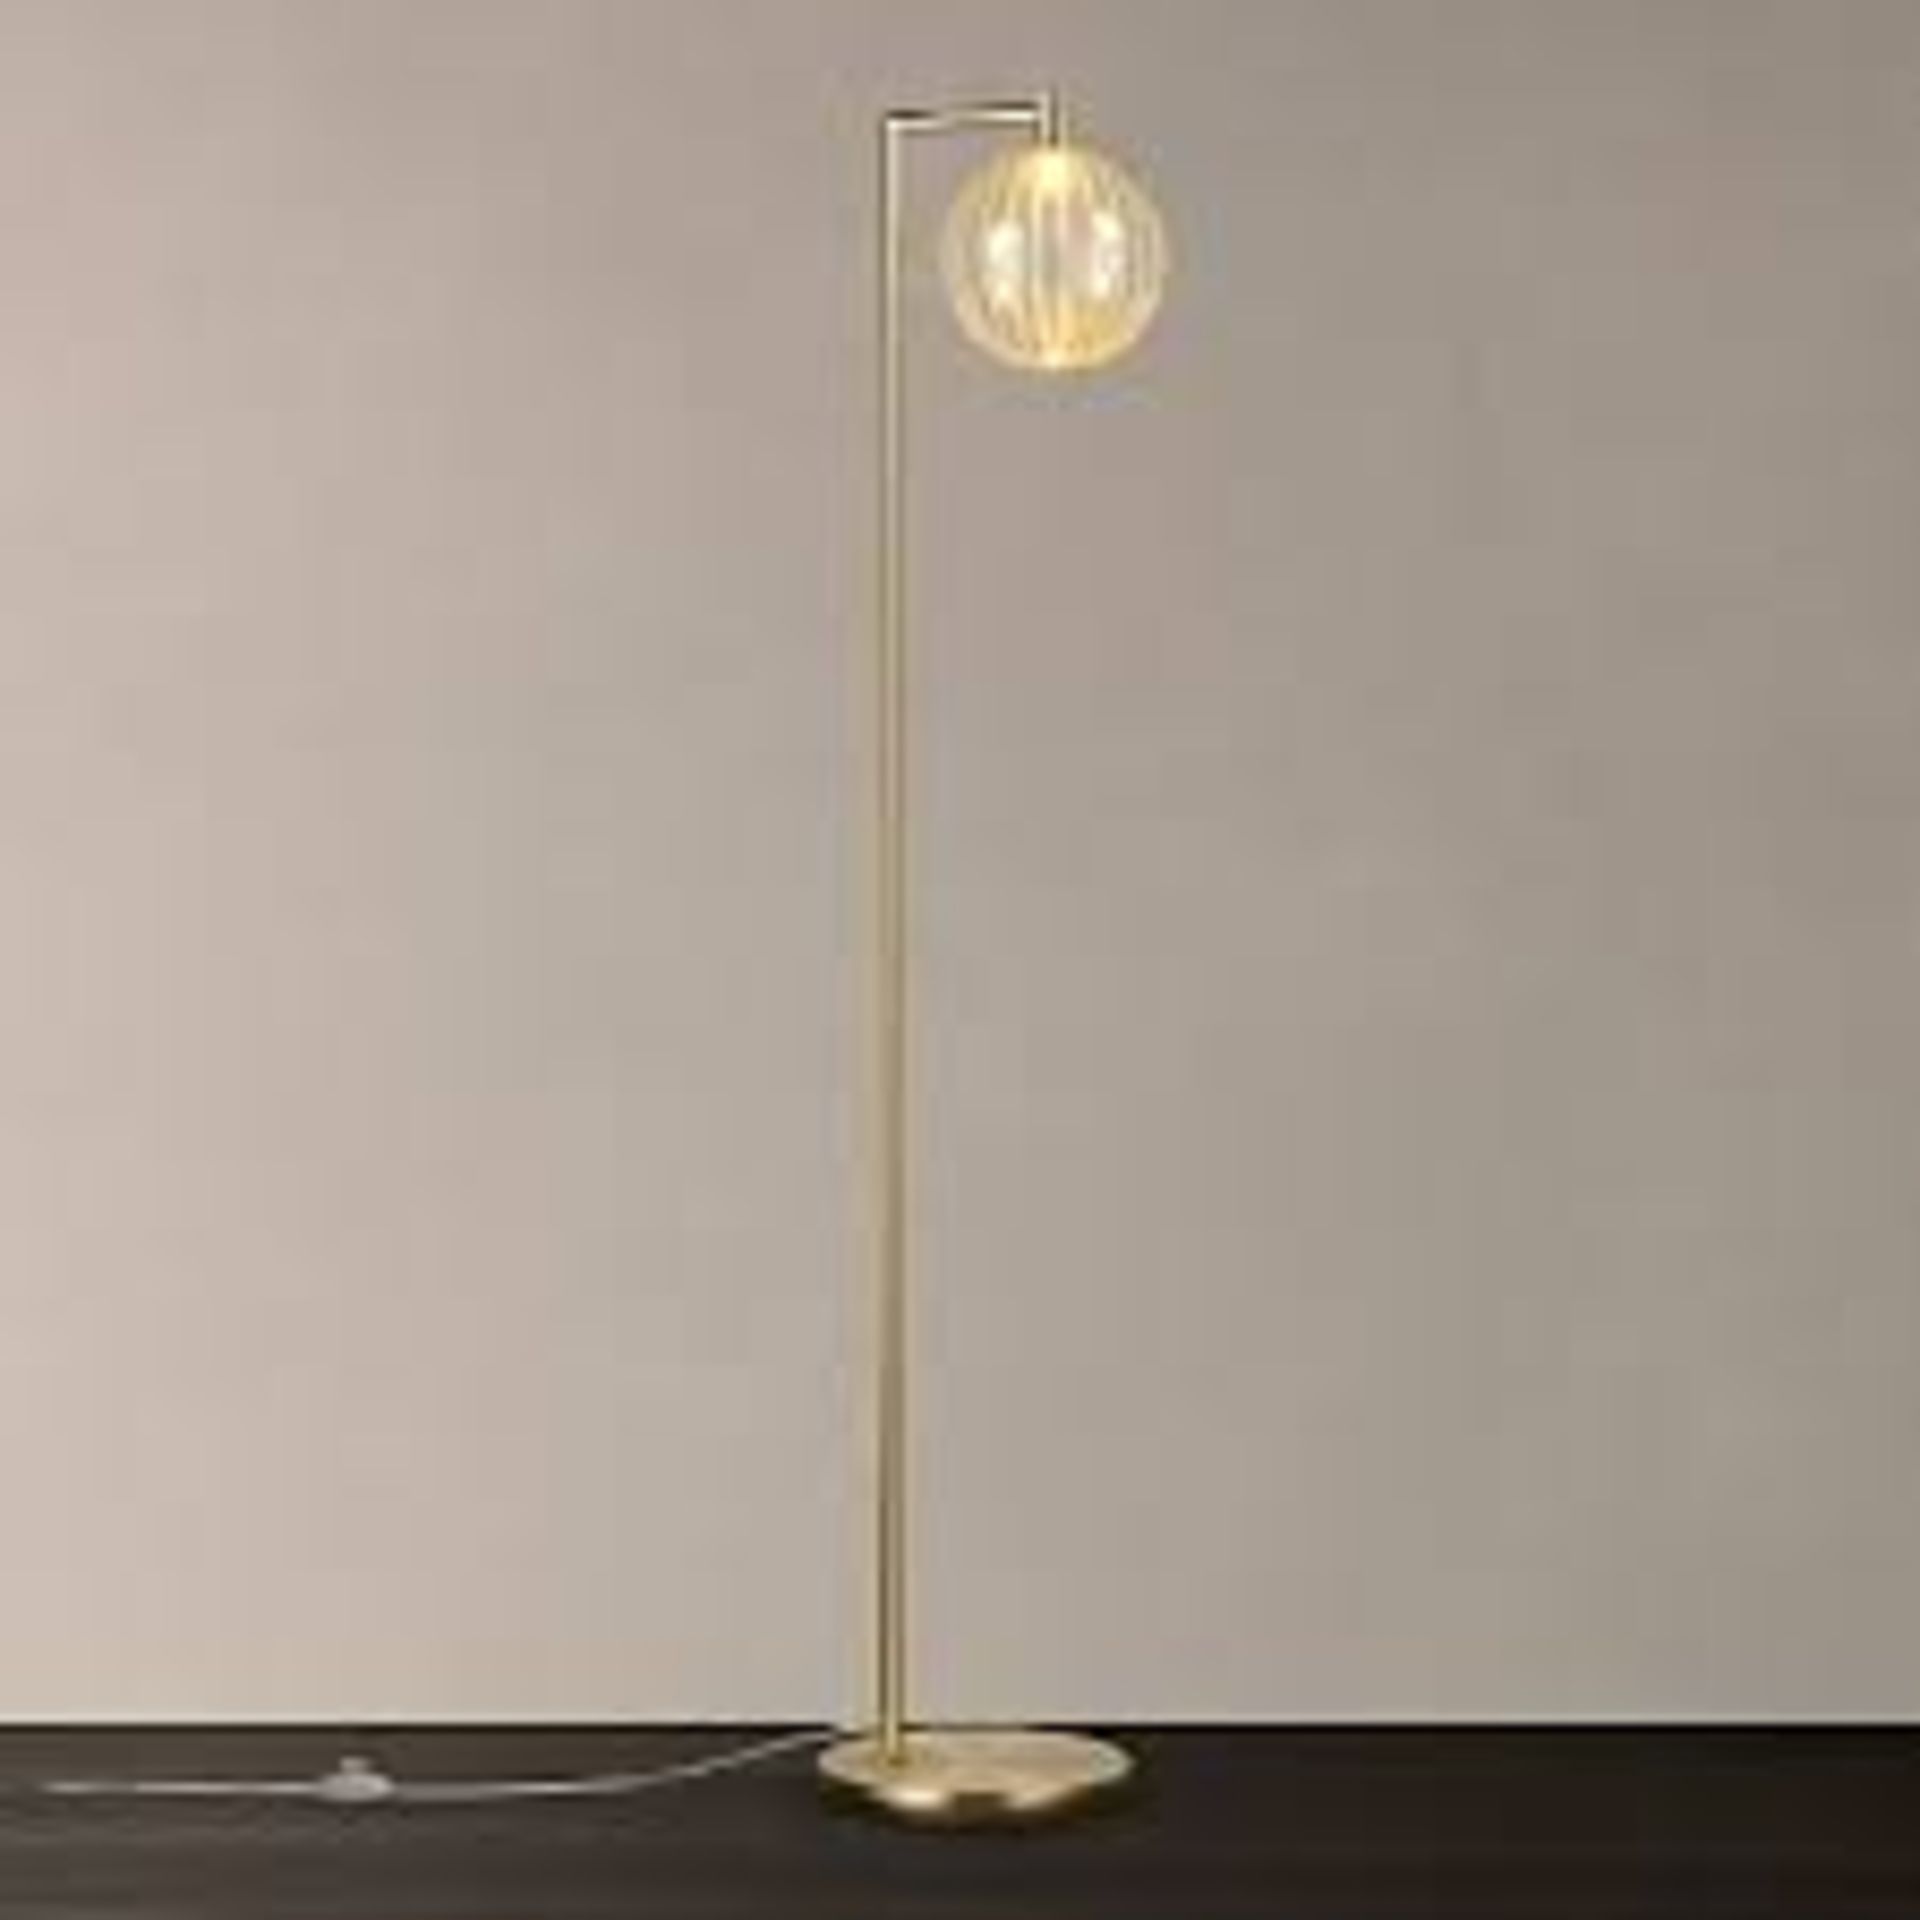 Boxed John Lewis And Partners Marlo LED Satin Brass Finish Glass Shade Floor Standing Lamp RRP £